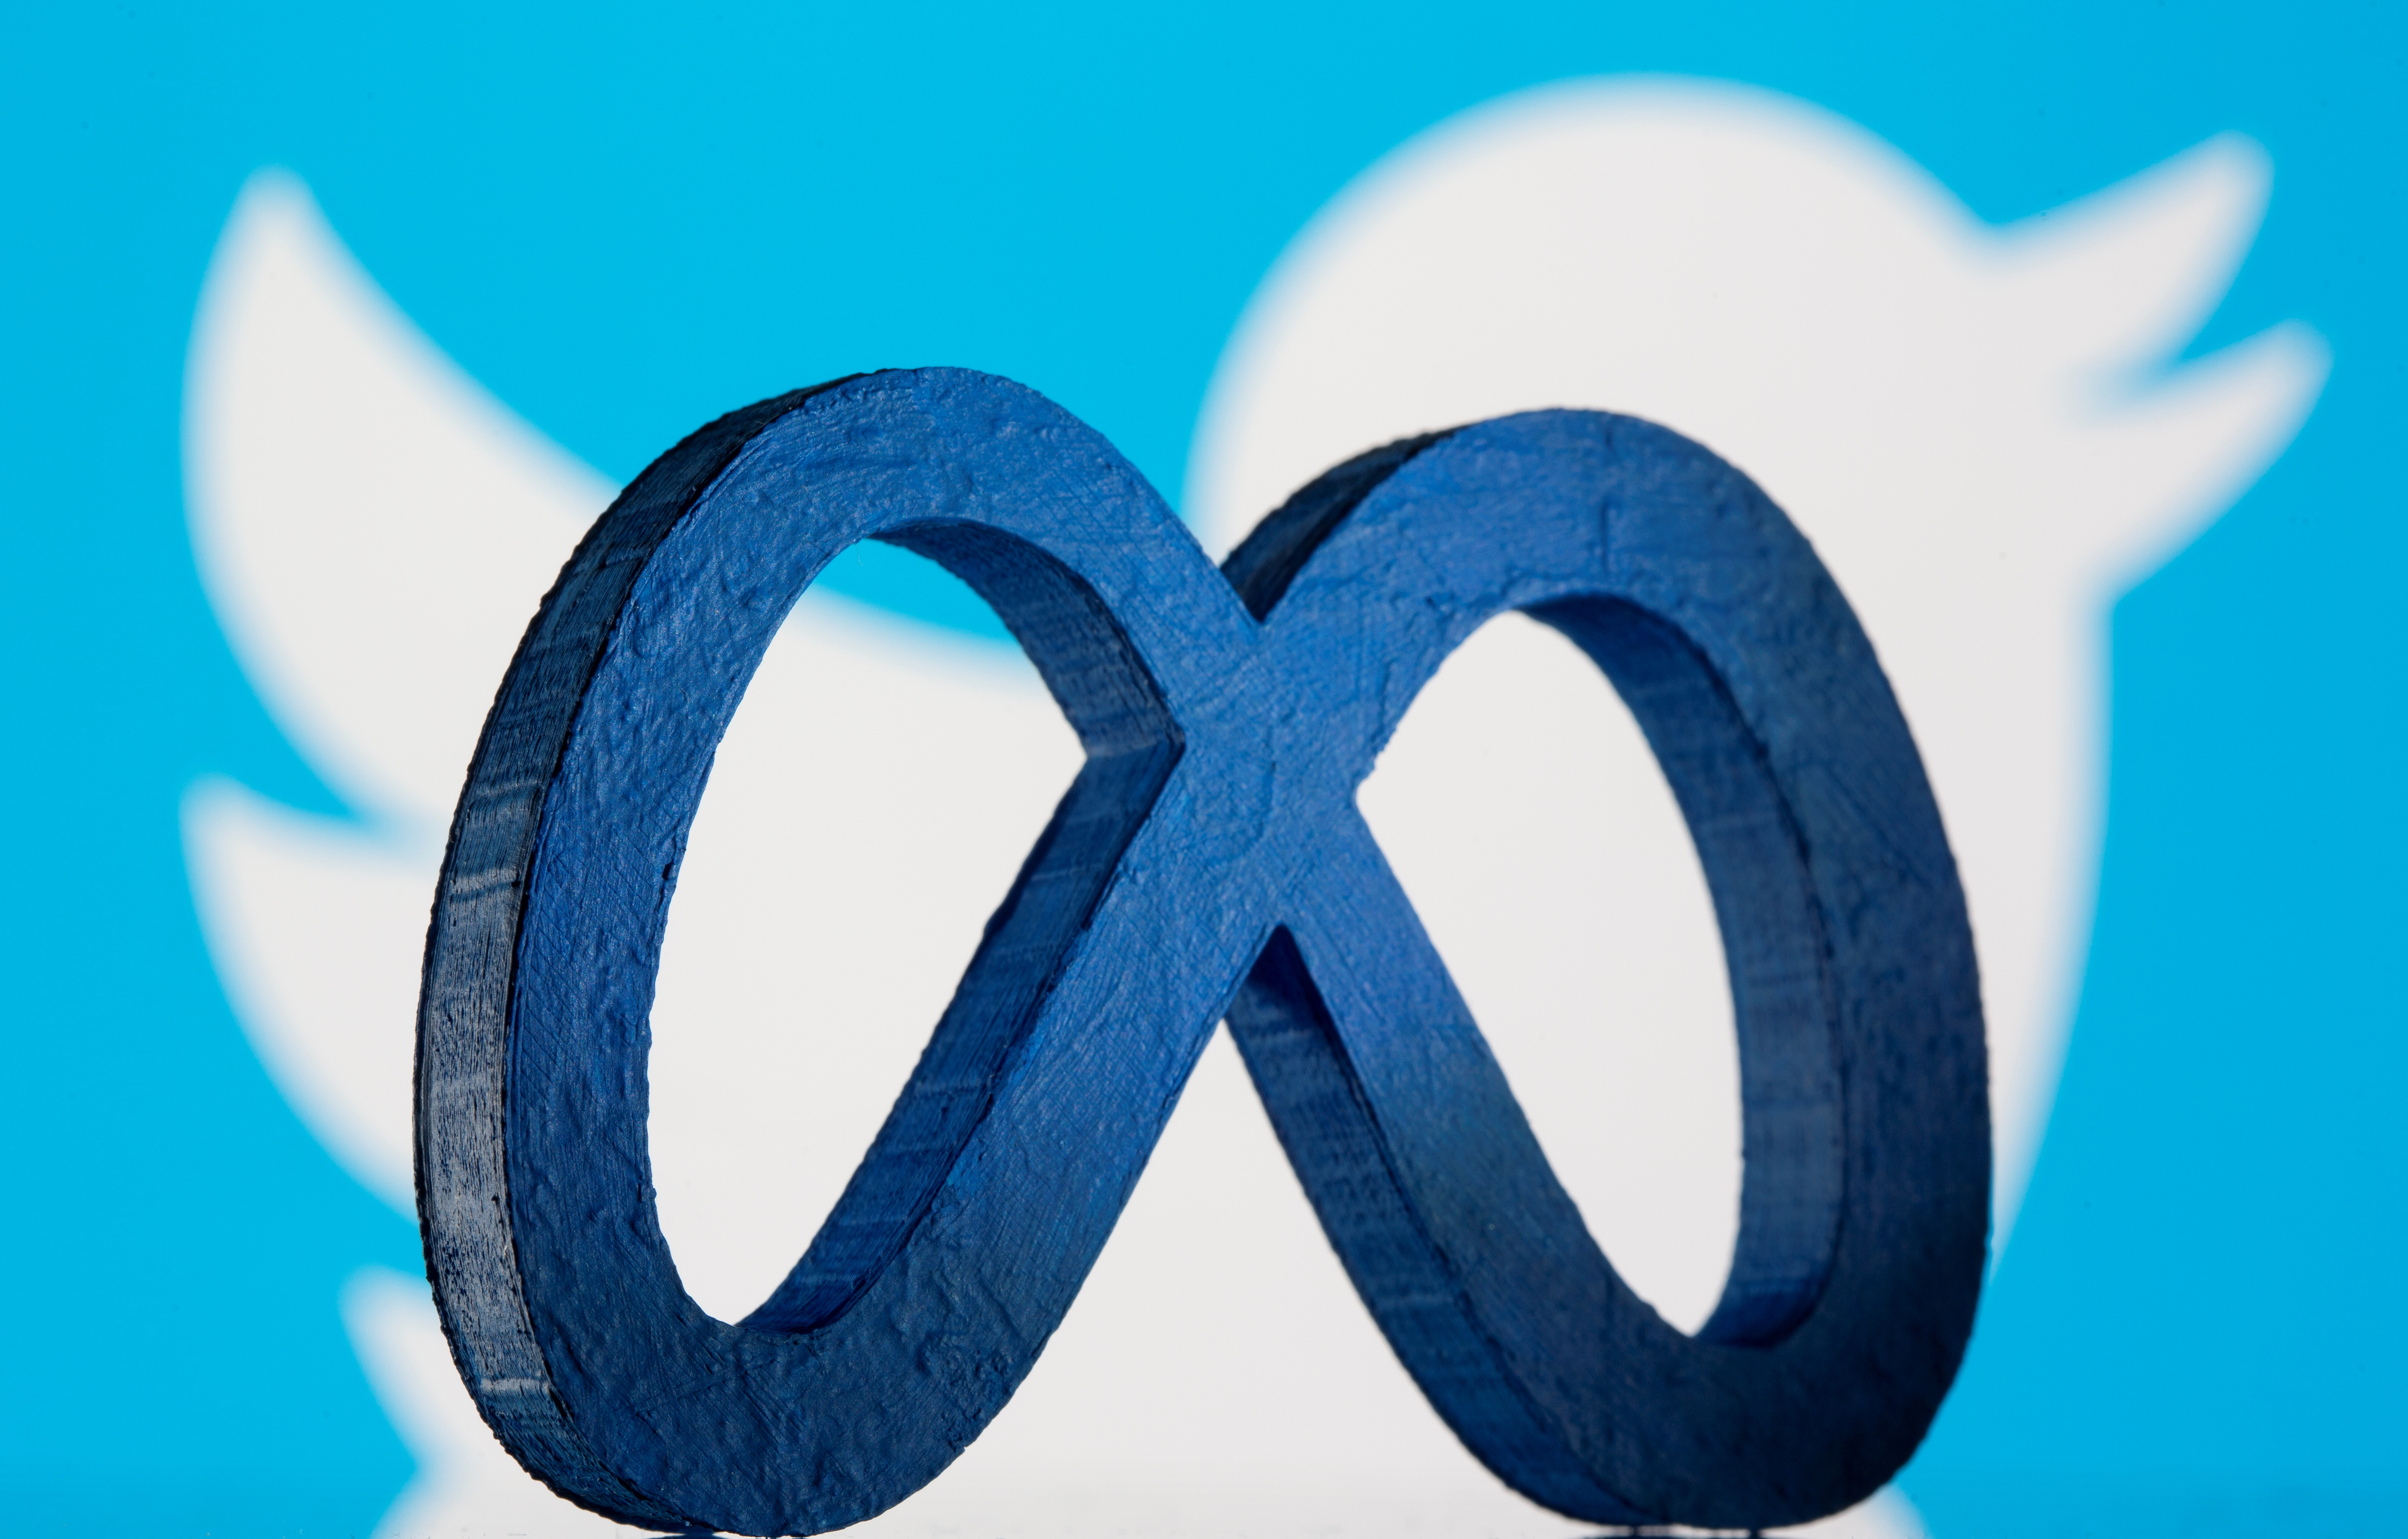 A 3D printed Facebook's new rebrand logo Meta is seen in front of displayed Twitter logo in this illustration